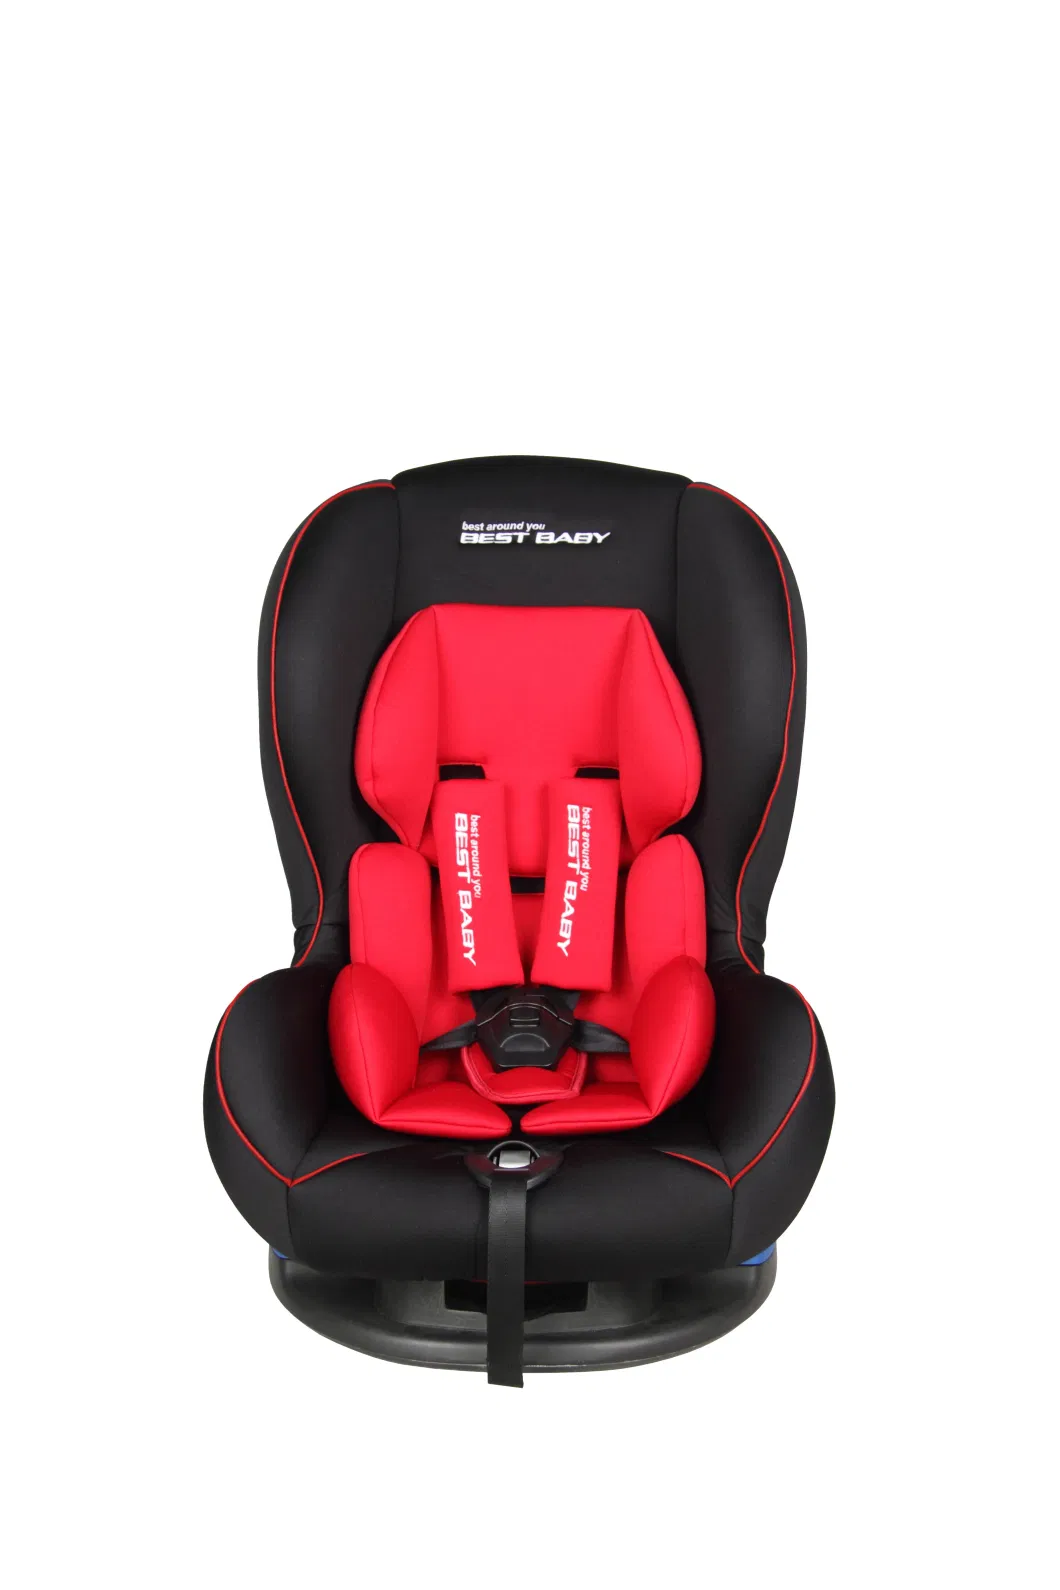 Lb393 Baby Kids Car Seat Group 0+1 (0-18kgs) with Certificate ECE R44/04